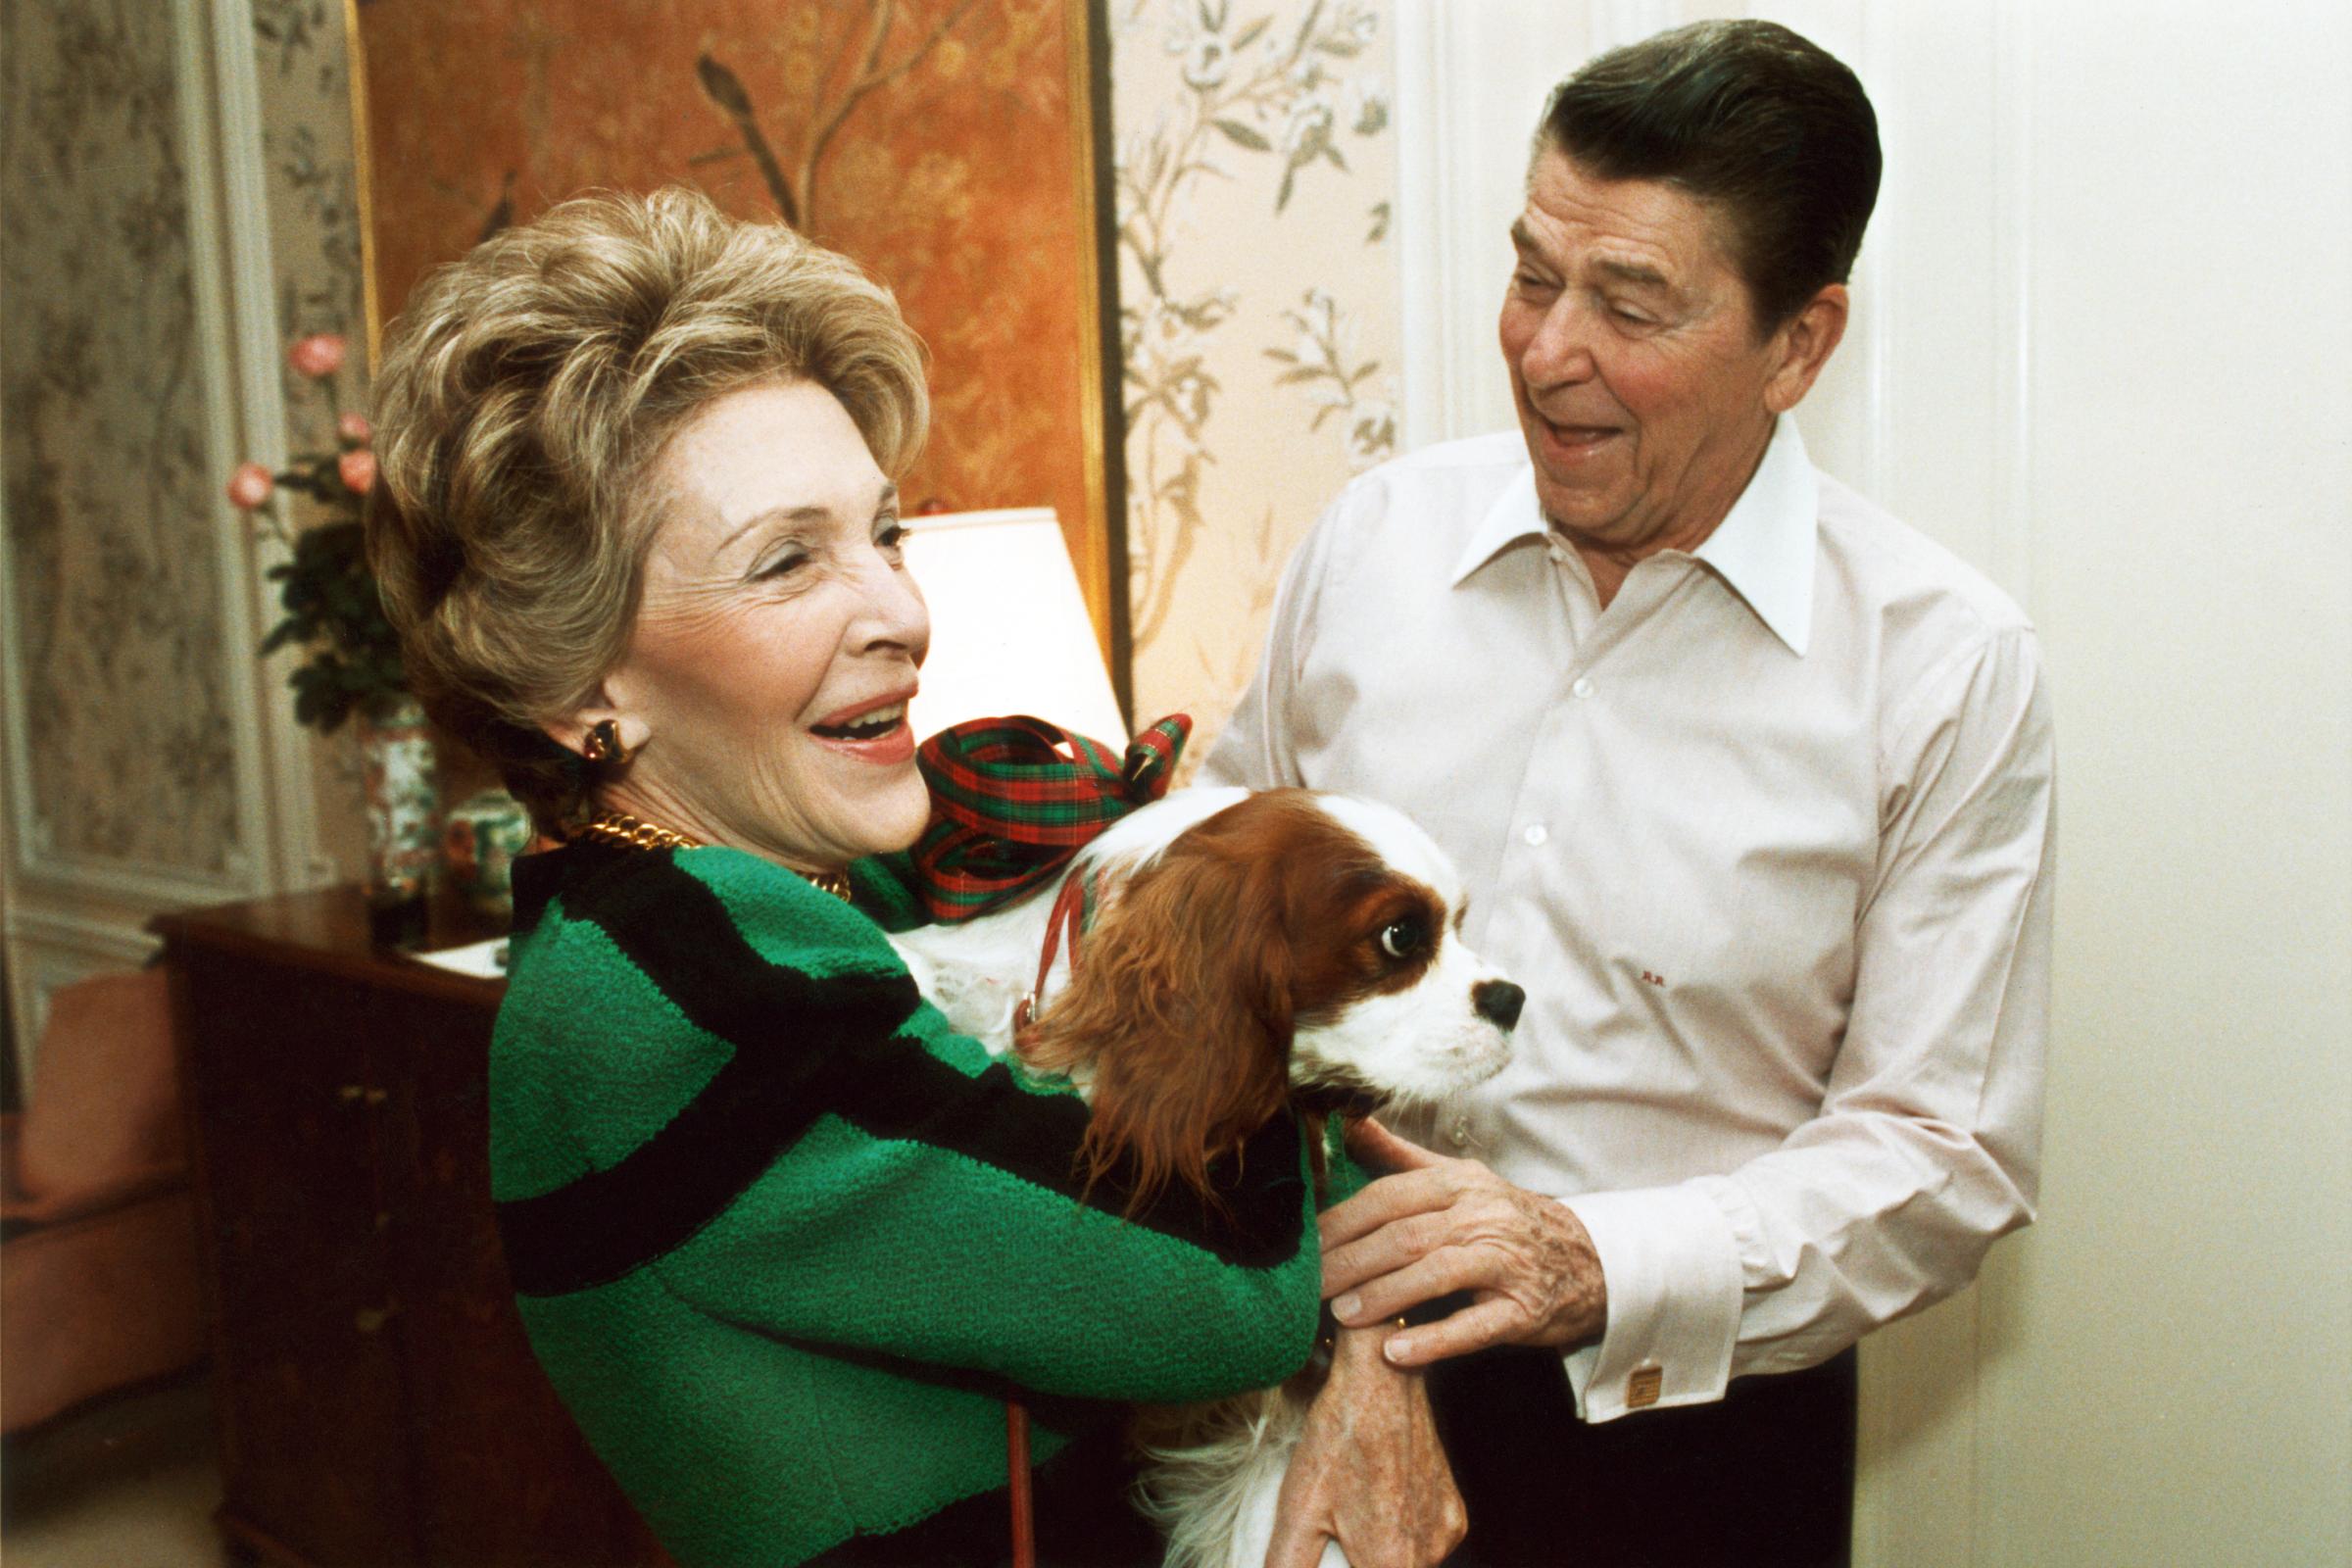 President Ronald Reagan presents First Lady Nancy Reagan with an early Christmas present of a King Charles Spaniel named Rex, at their suite in a New York hotel on Dec. 6, 1985.